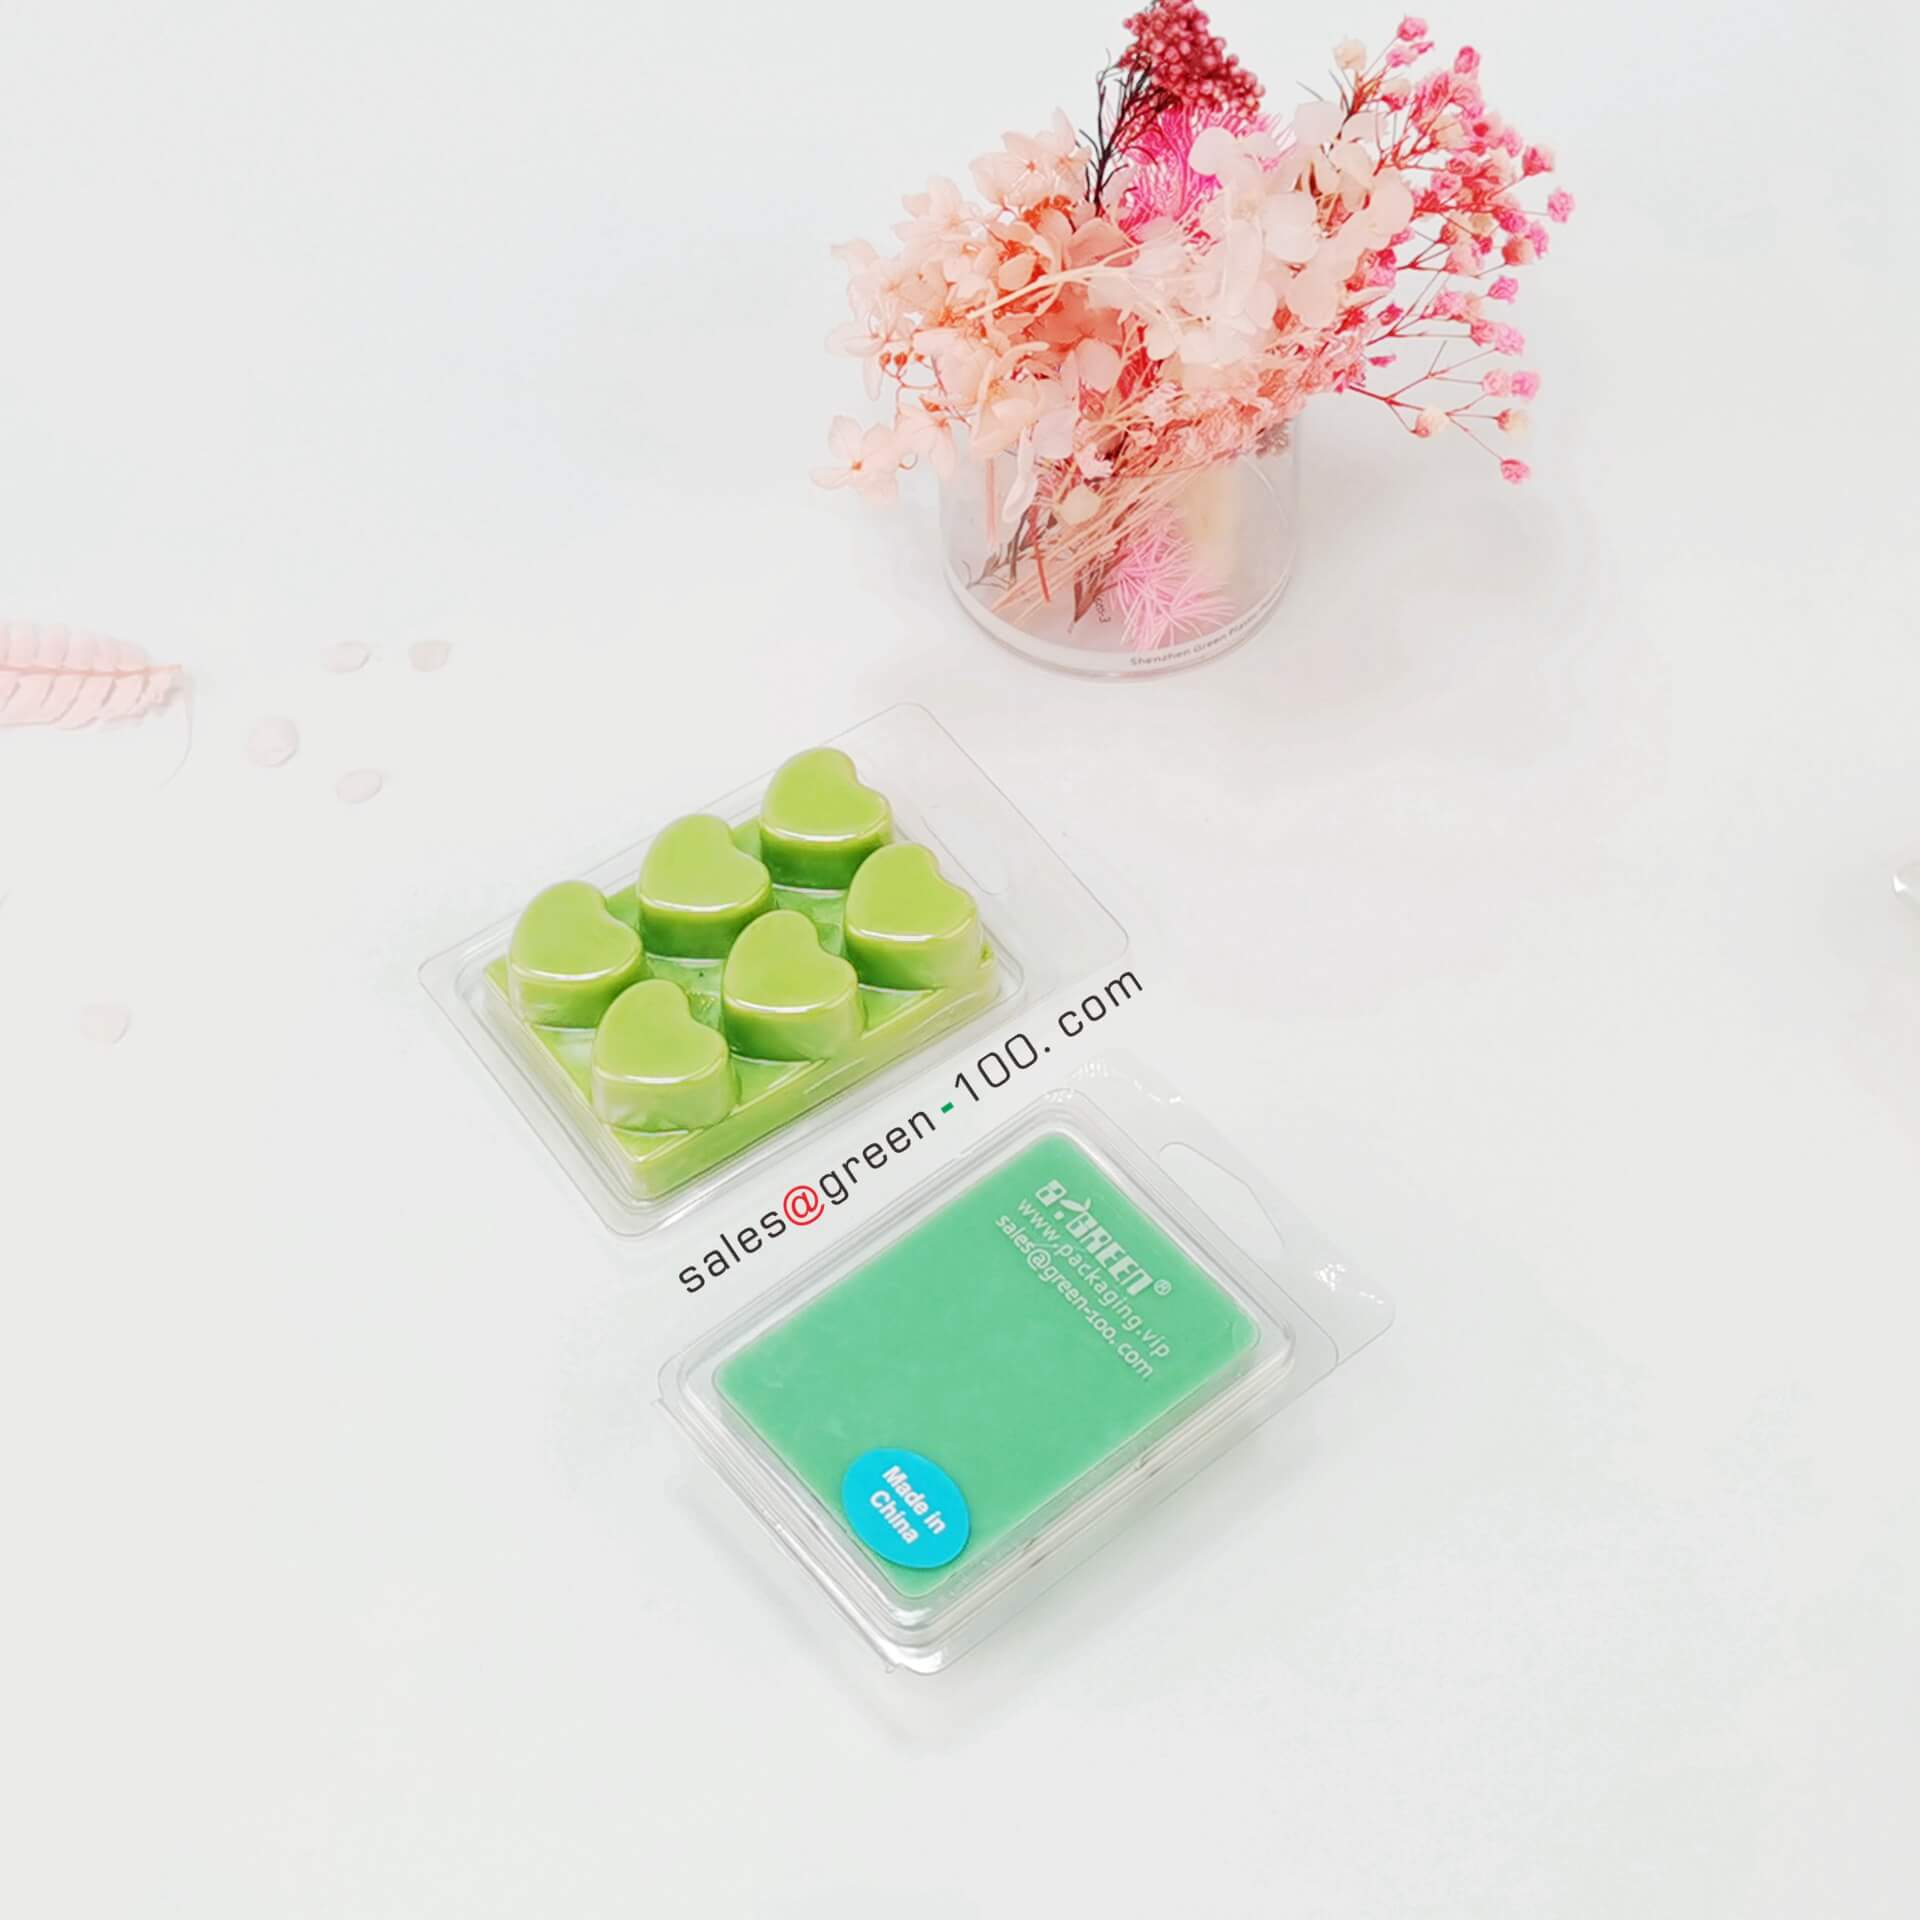 10 Clamshell Mould Wax Melts Made from recycled Plastic. 